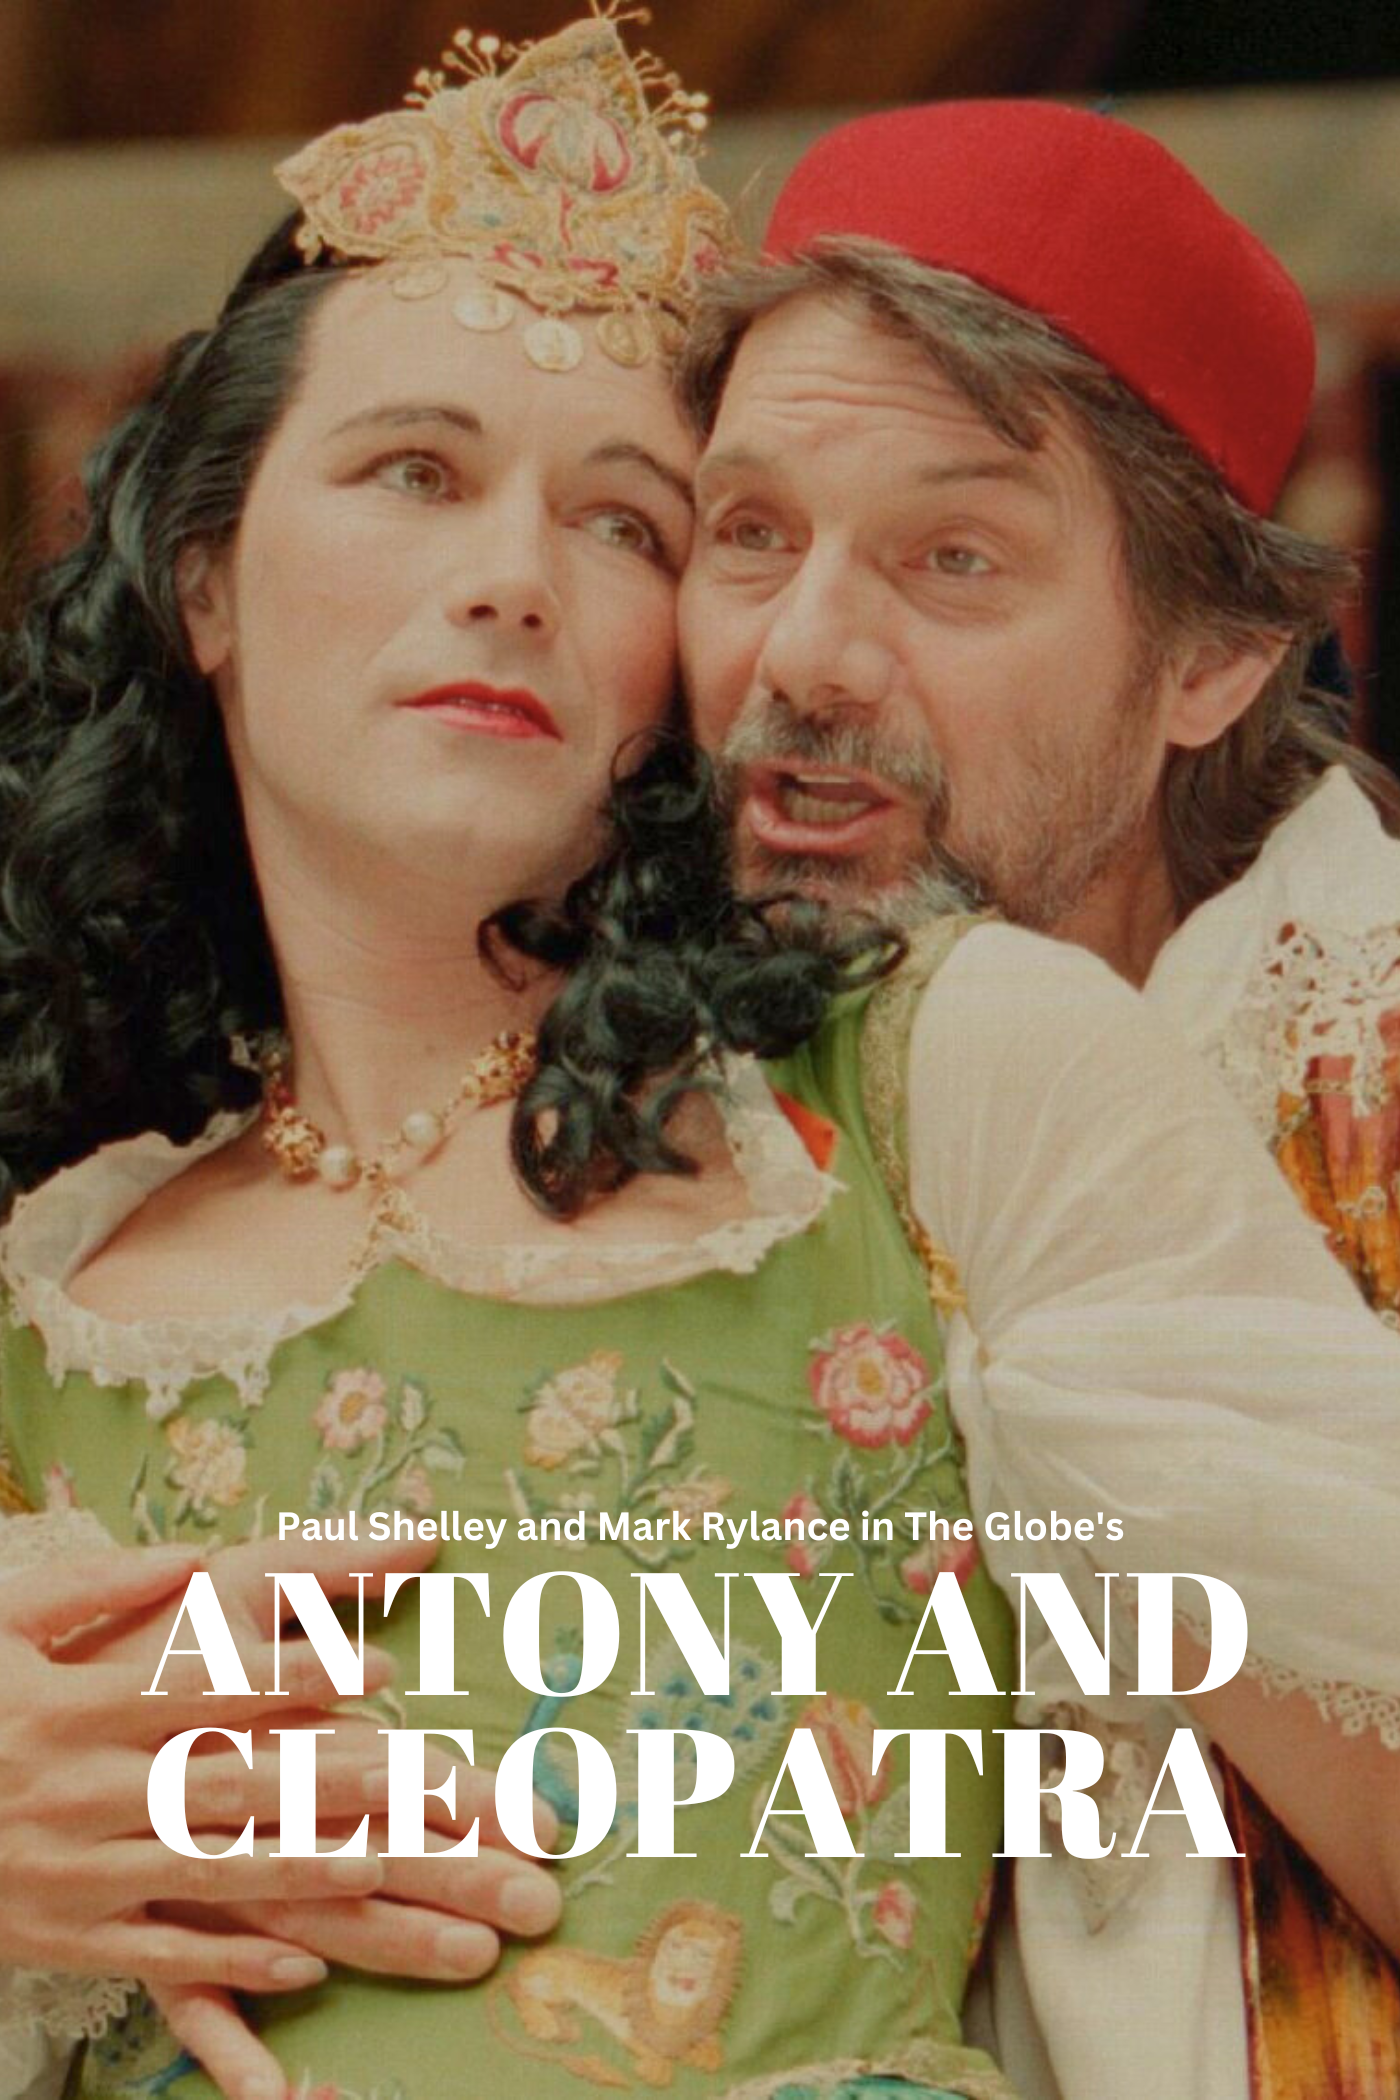 Mark Rylance, Antony and Cleopatra Poster.png